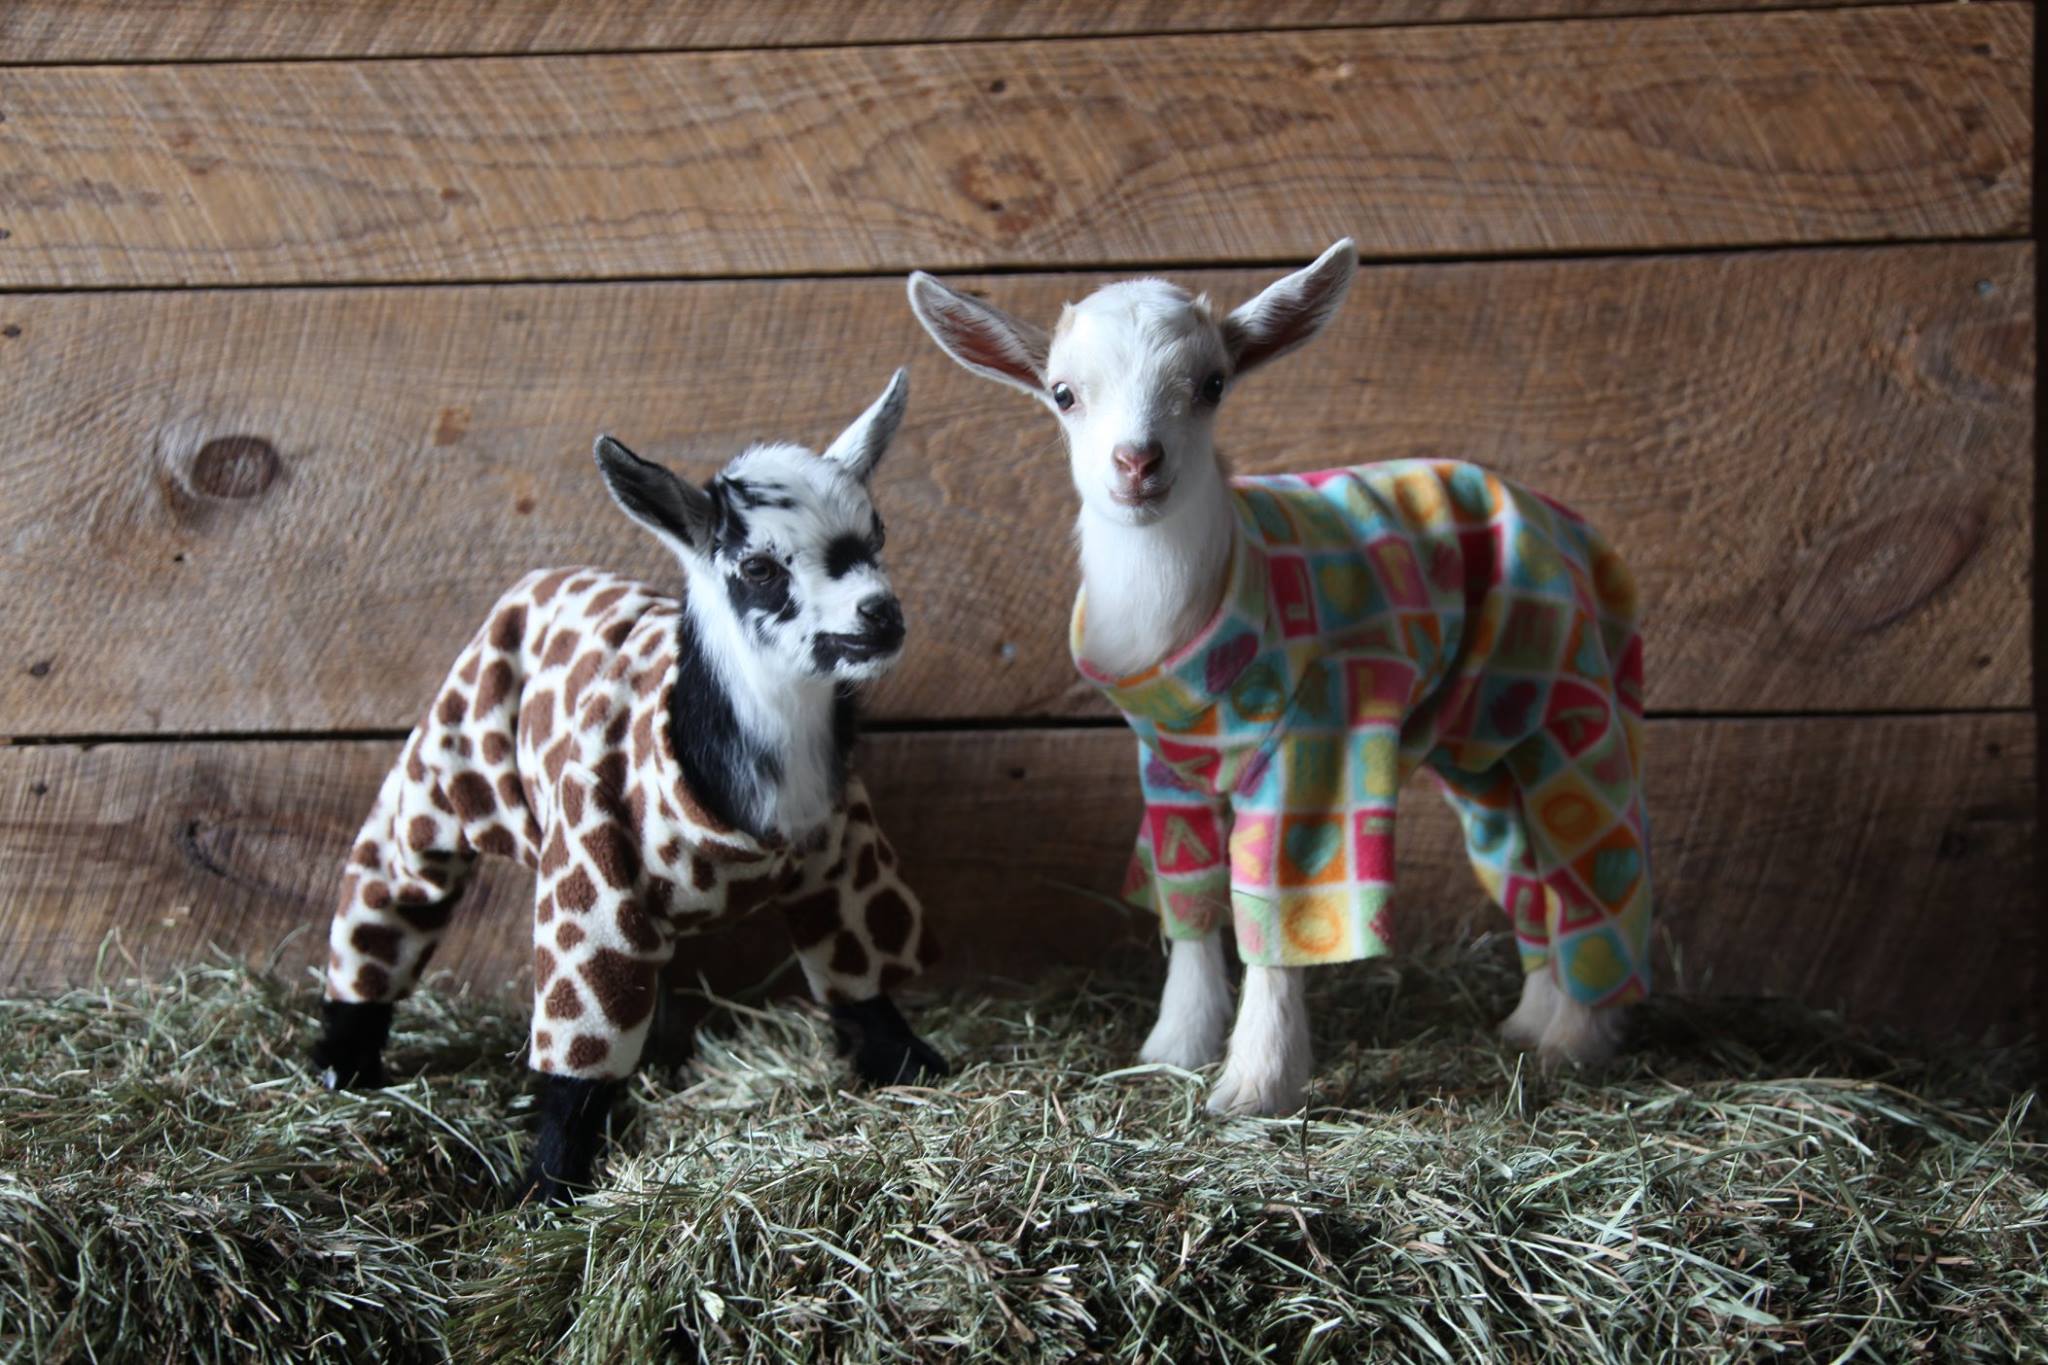 Baby Goats in PJs Frolicking in Colorful Onsies